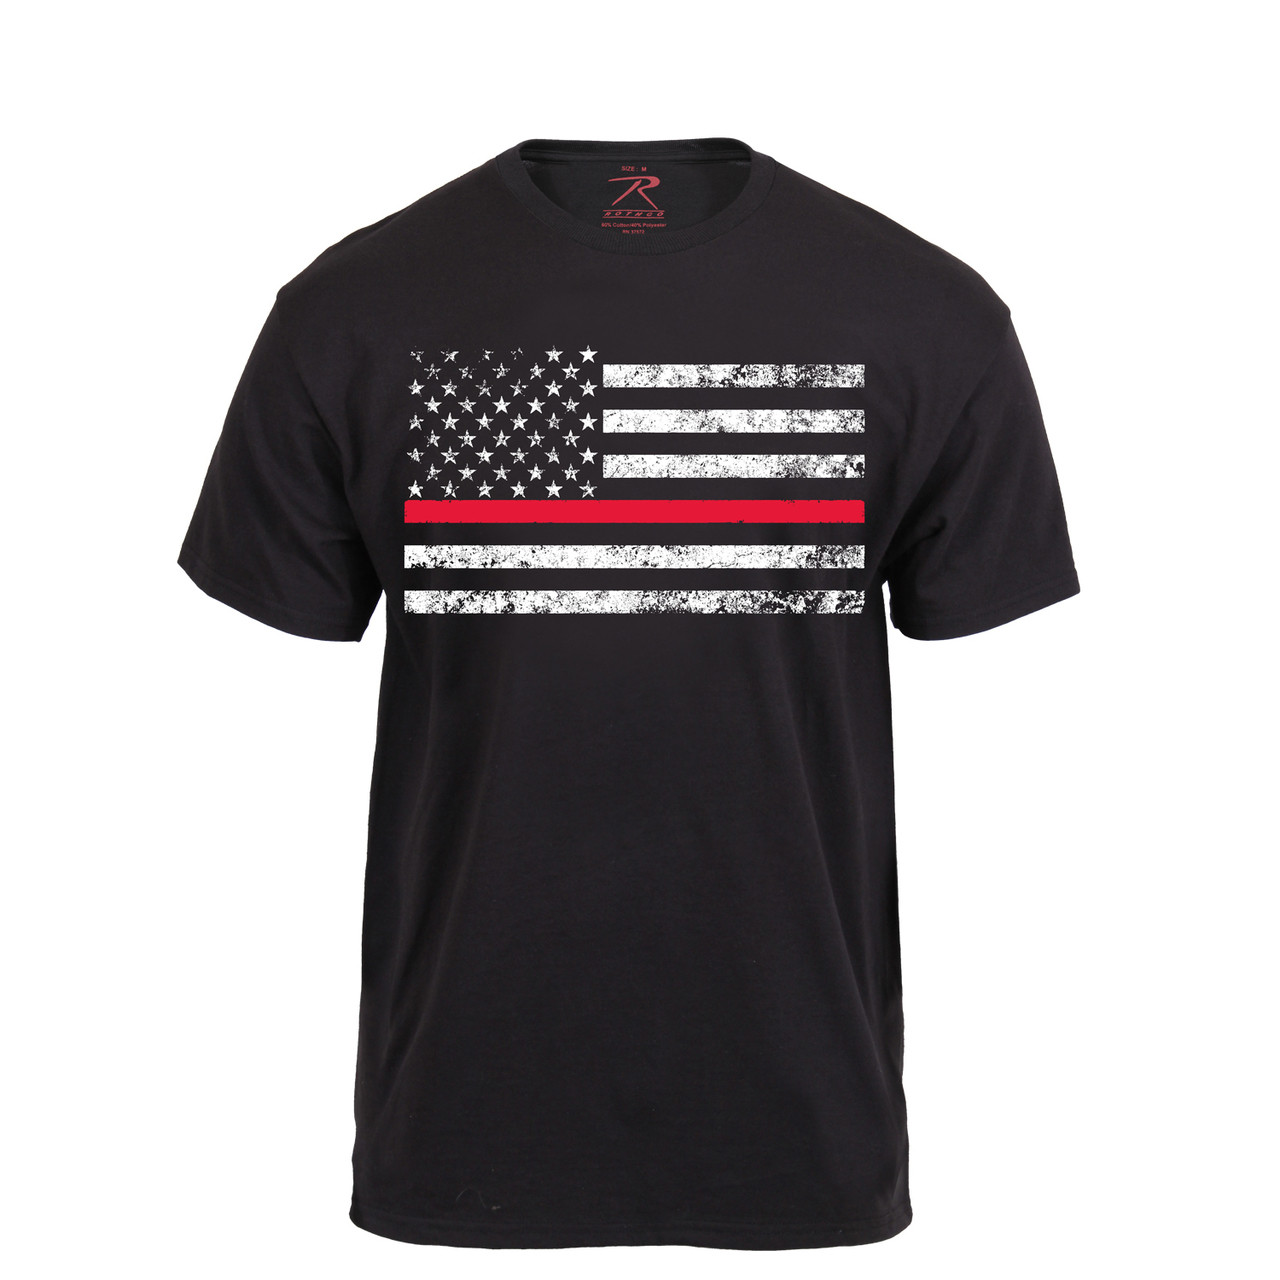 Shop Thin Red Line T Shirts - Fatigues Army Navy Gear